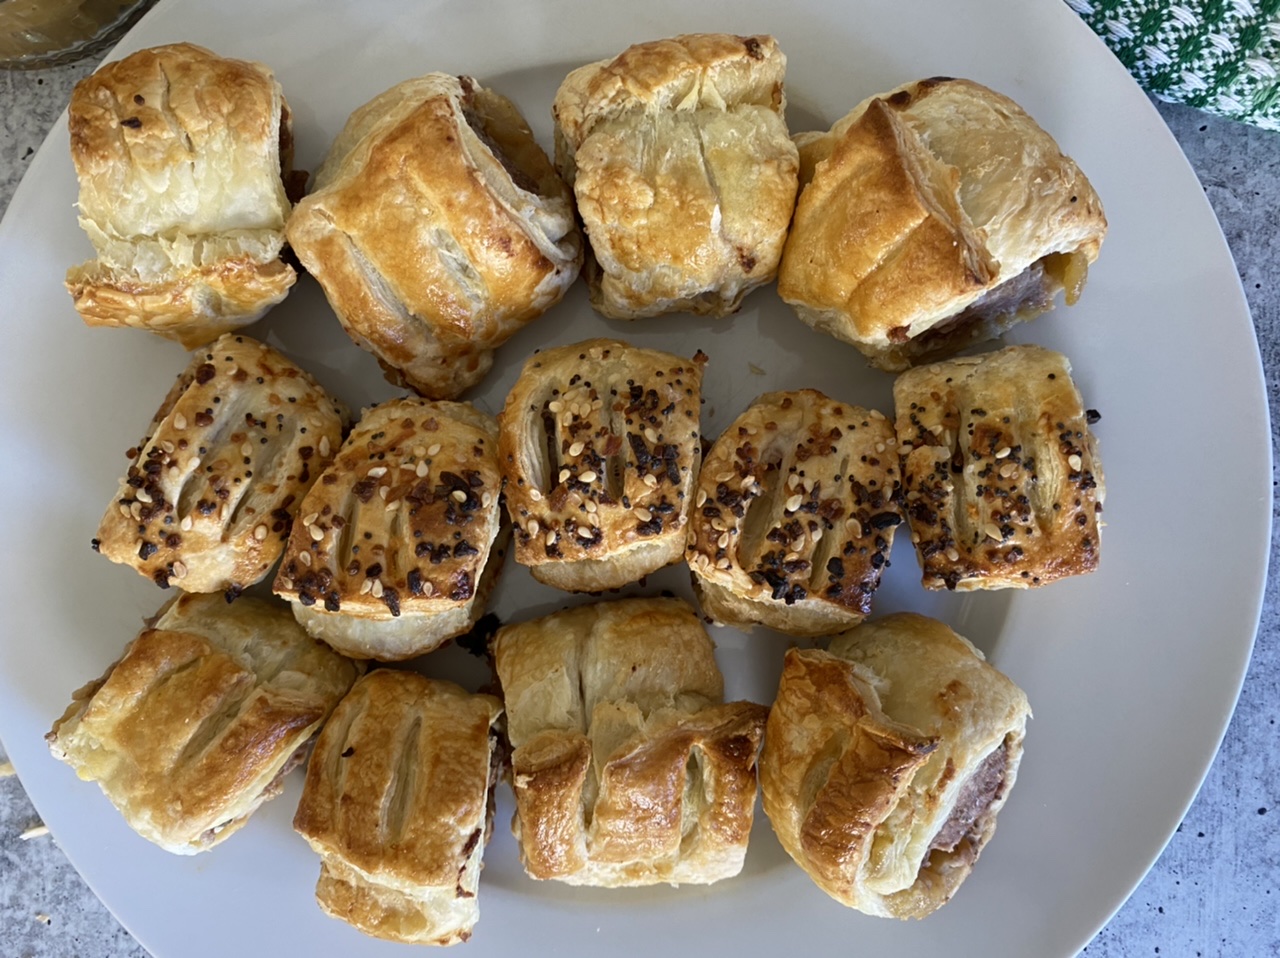 2BB74352 51E5 4899 BD59 F4265120C603 - How to Make Sausage Rolls with Apple Chutney